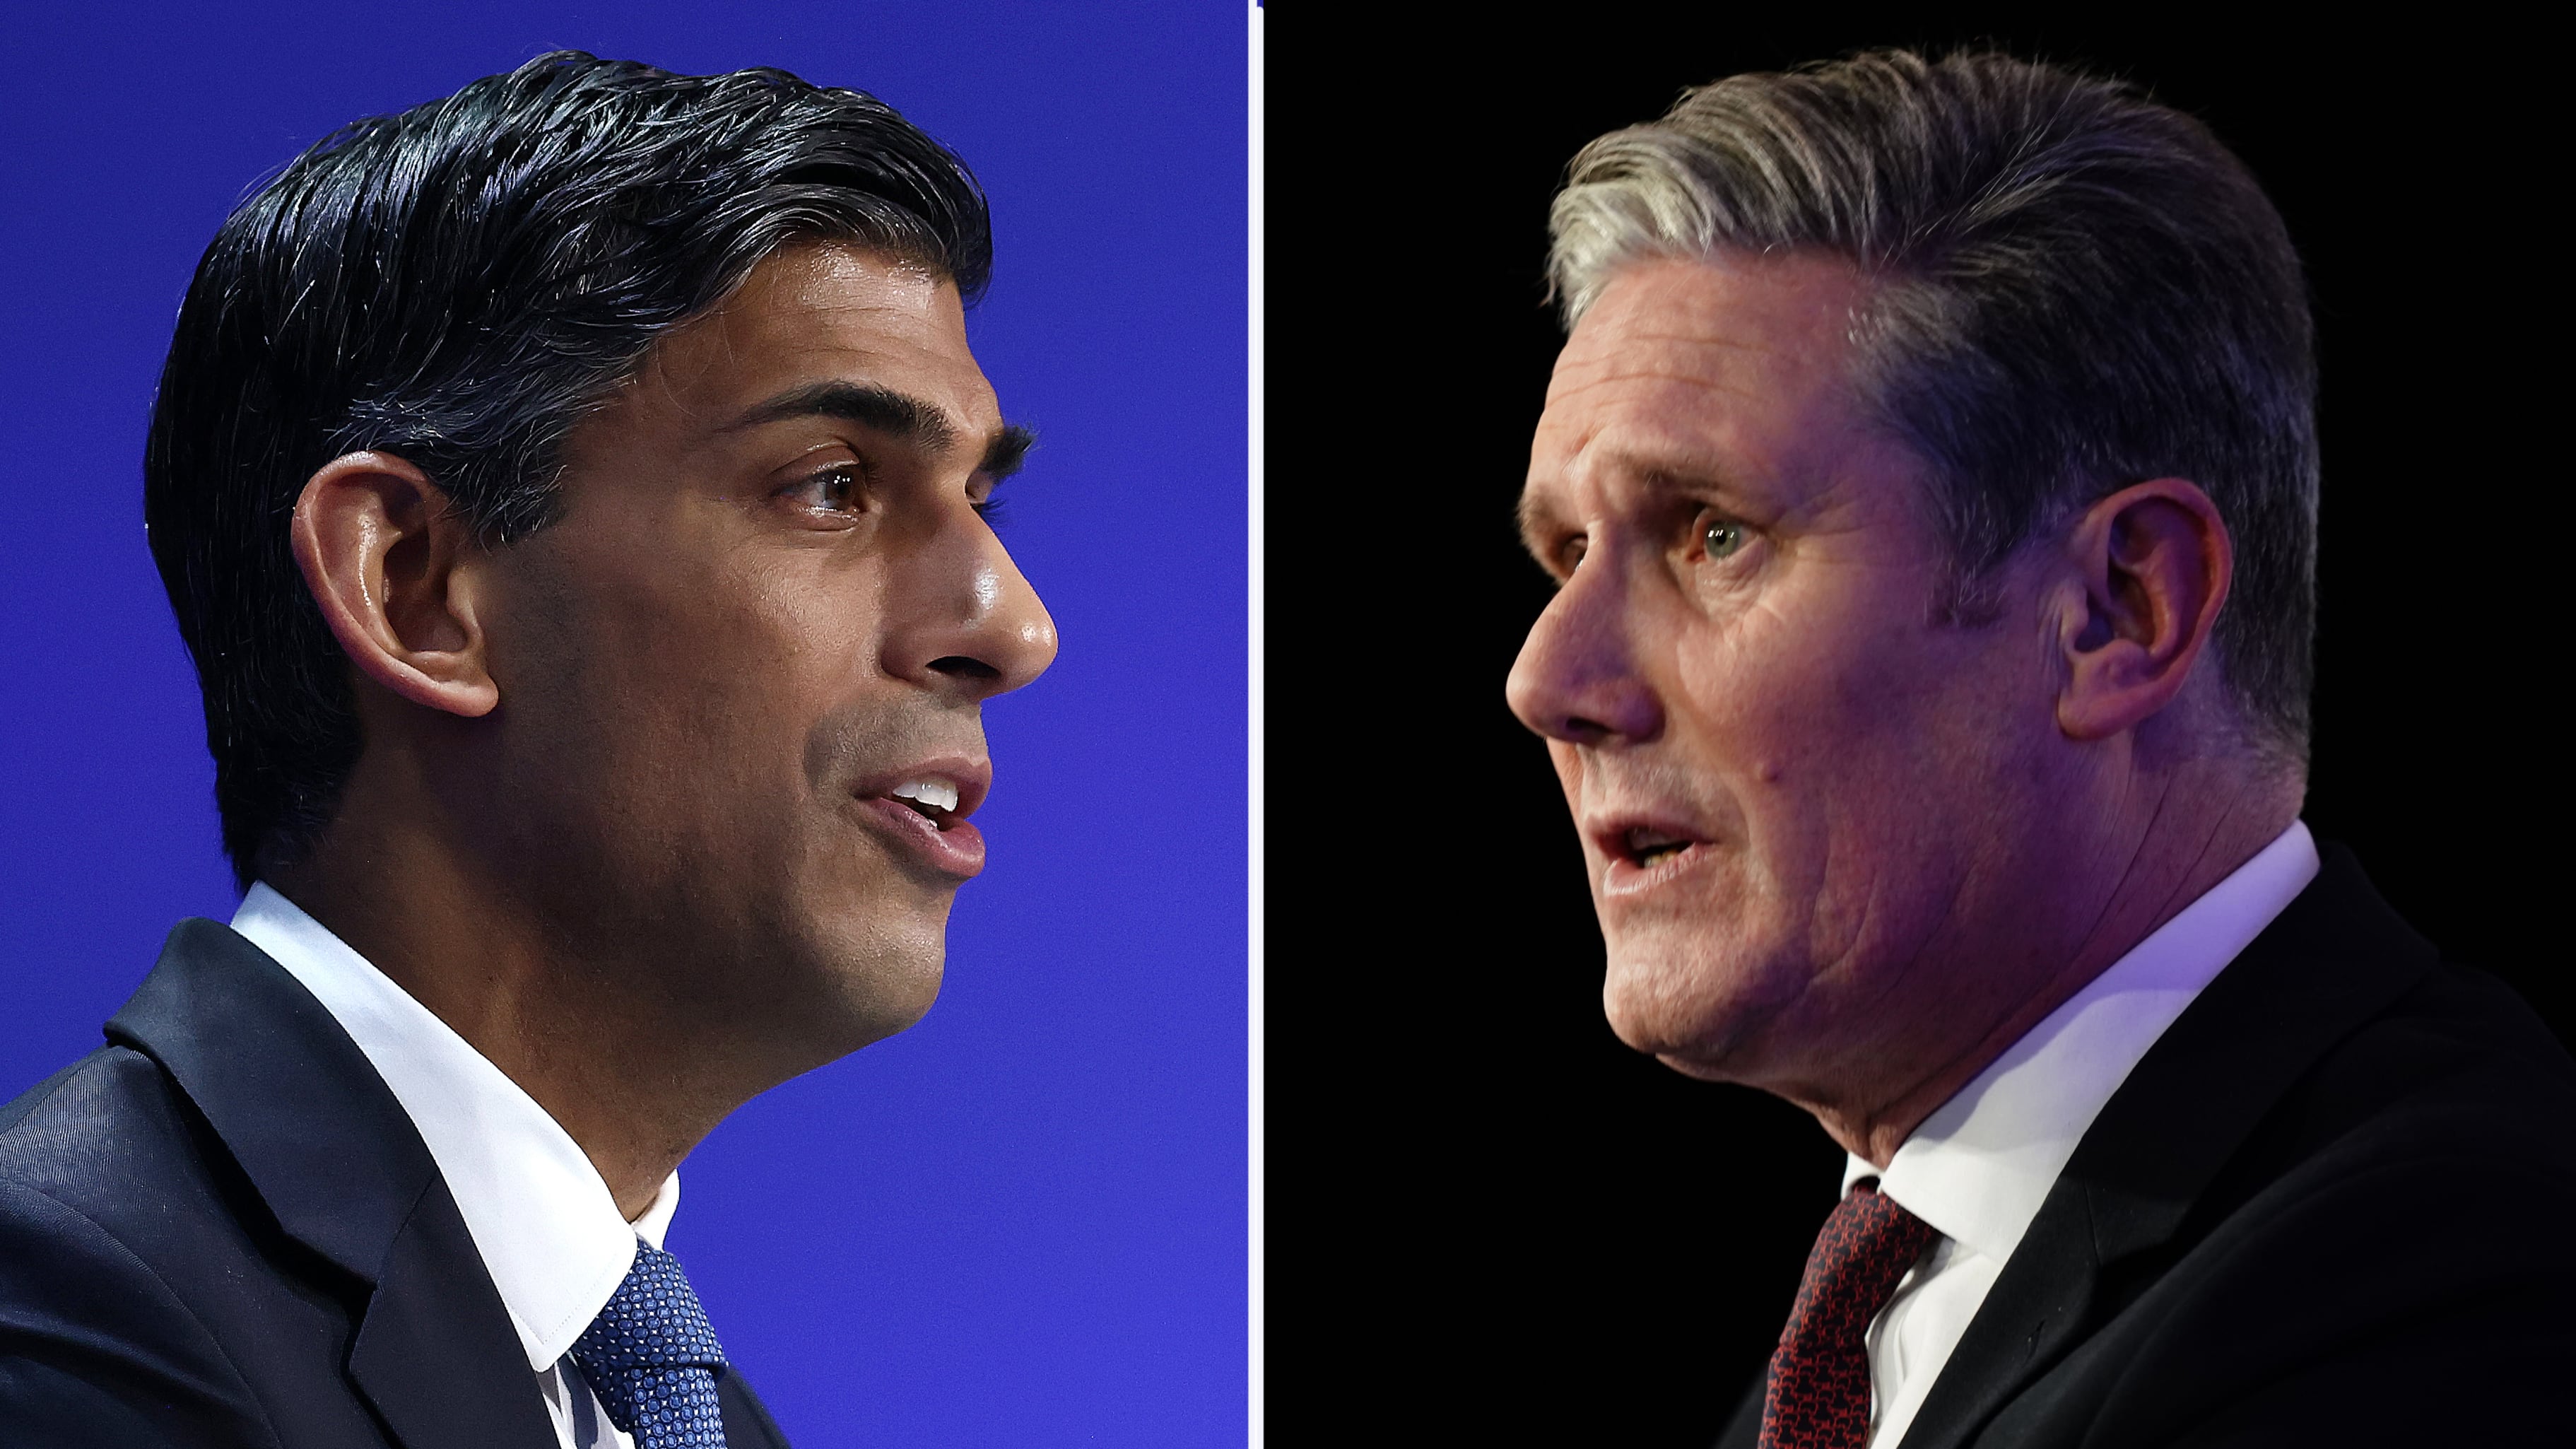 Prime Minister Rishi Sunak and Labour leader Sir Keir Starmer ahead of the first election debate on Tuesday